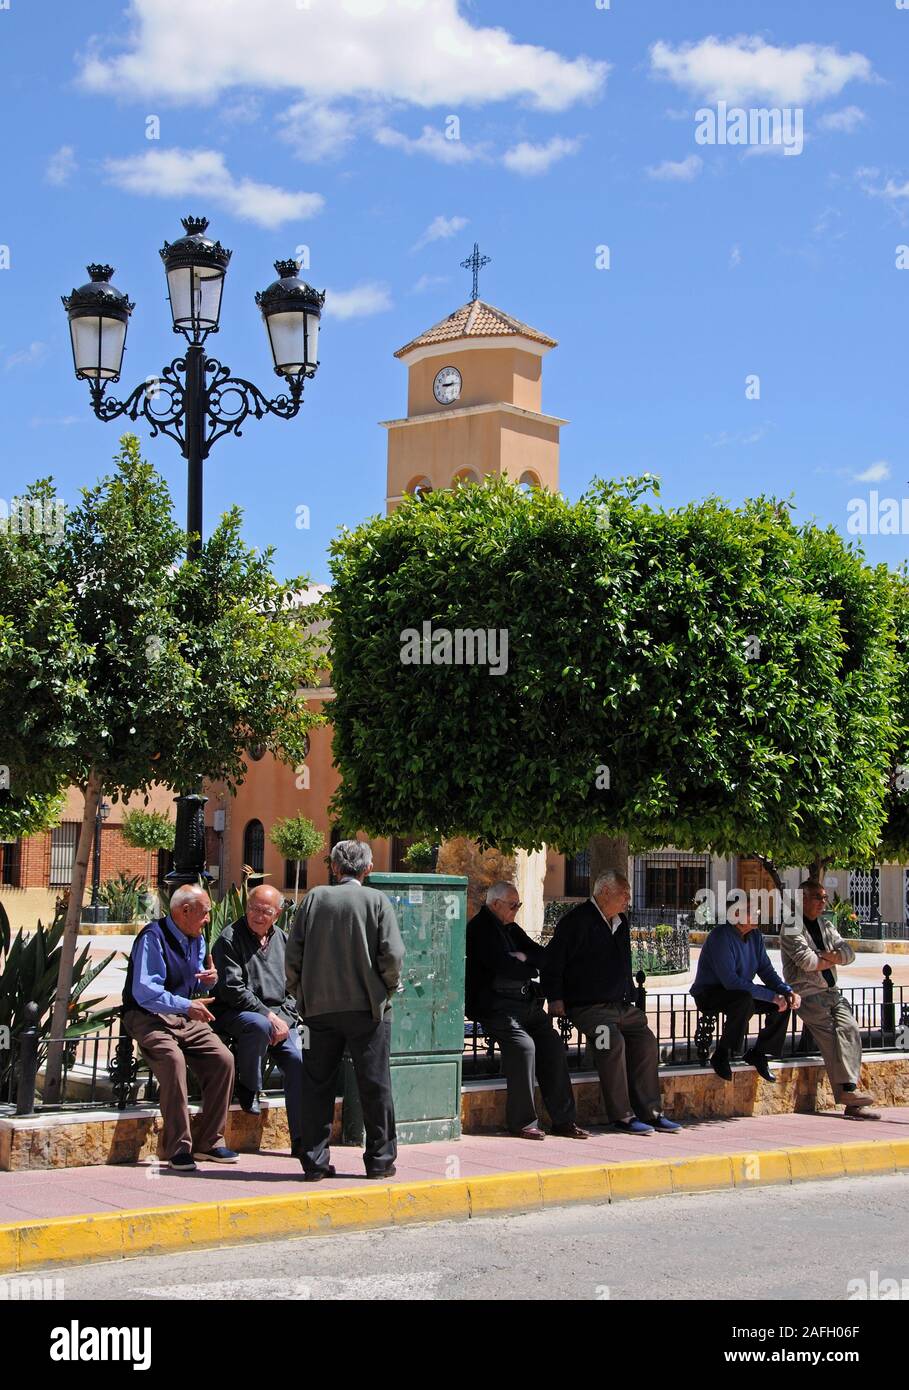 Elderly Spanish men chatting on the edge of the town square with the church tower to the rear, Albox, Almeria Province, Spain. Stock Photo